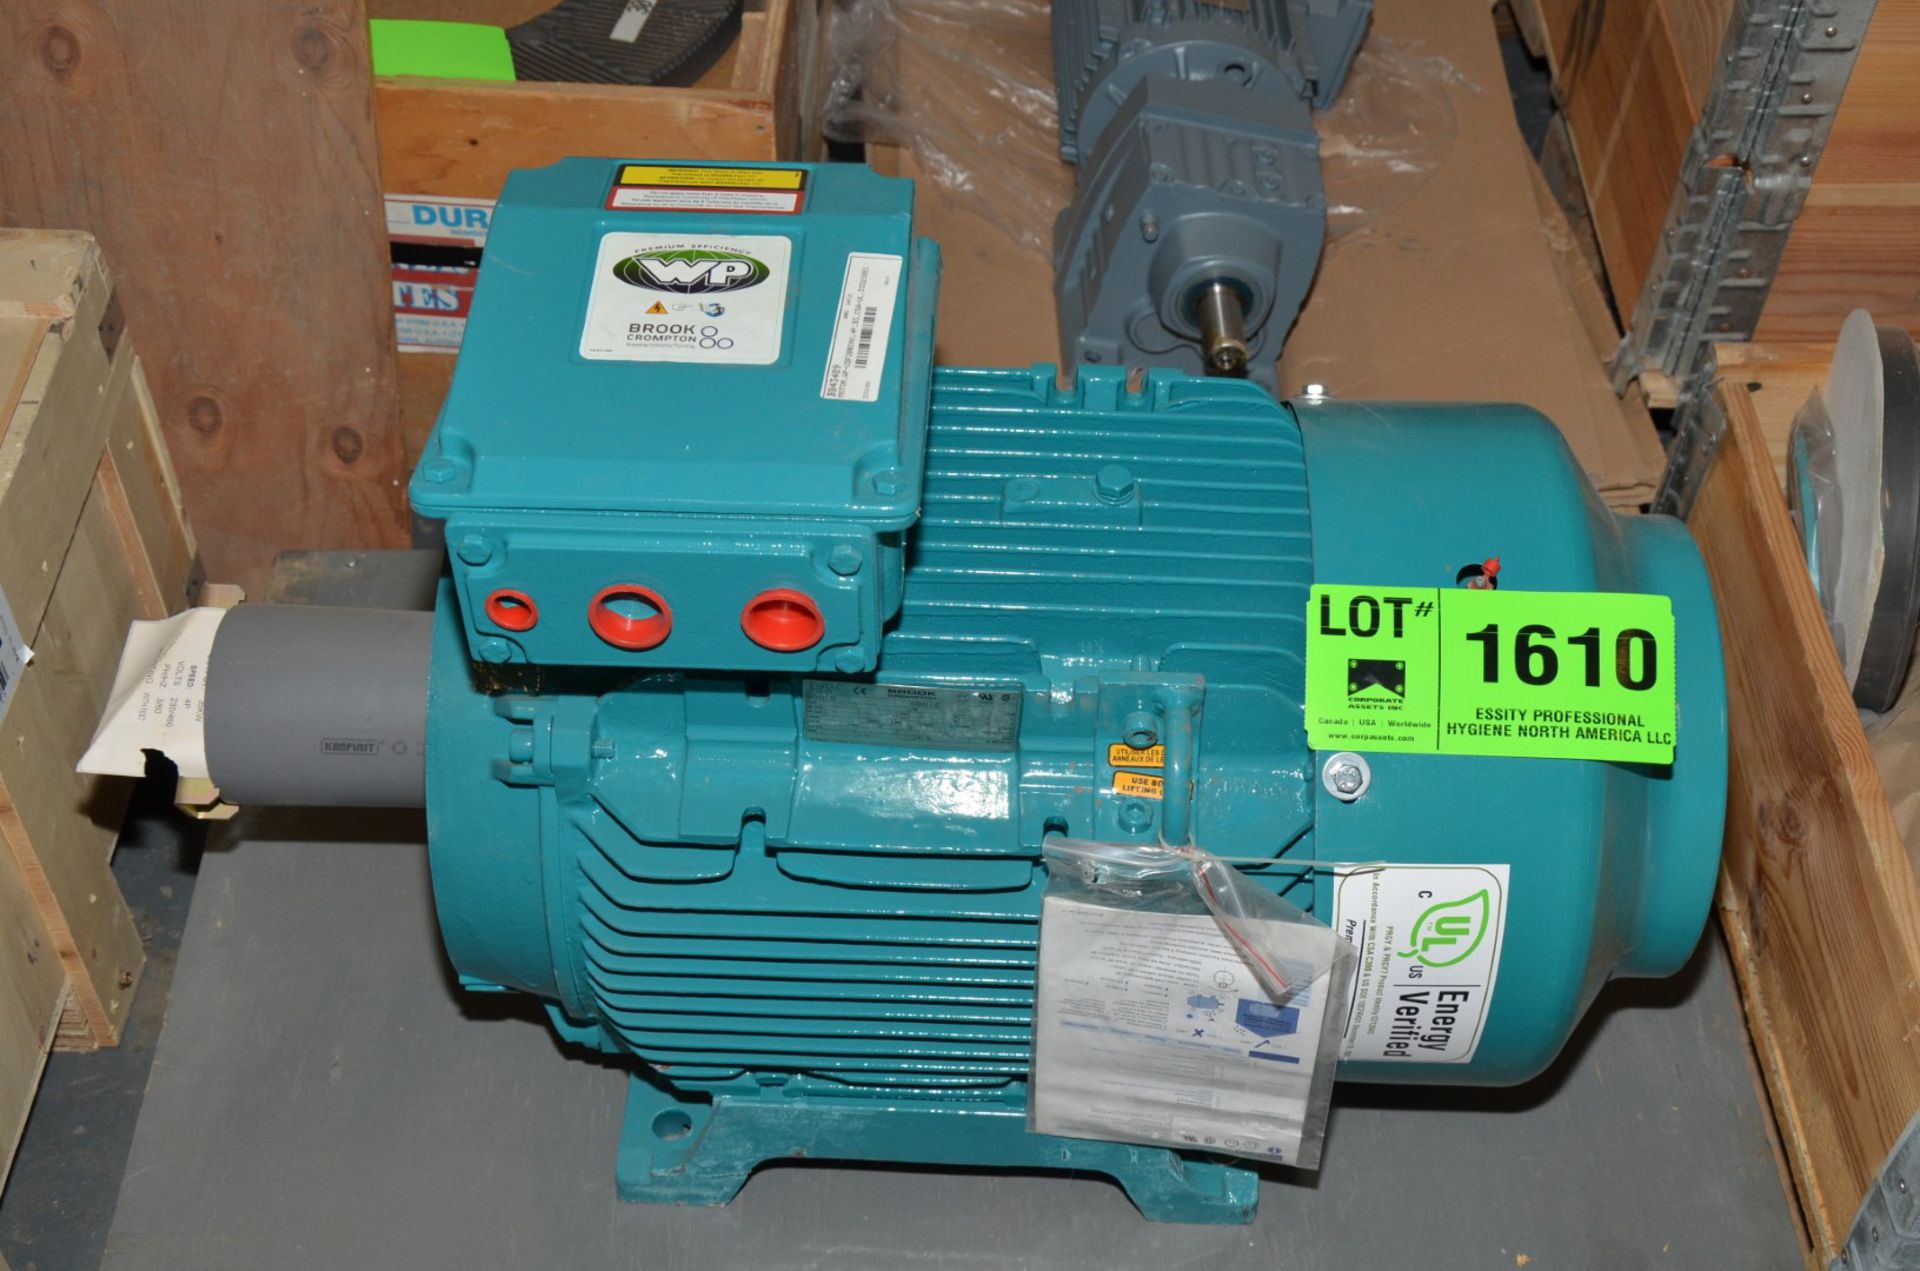 BROOK CROMPTON 35 HP 1770 RPM ELECTRIC MOTOR [RIGGING FEE FOR LOT #1610 - $25 USD PLUS APPLICABLE